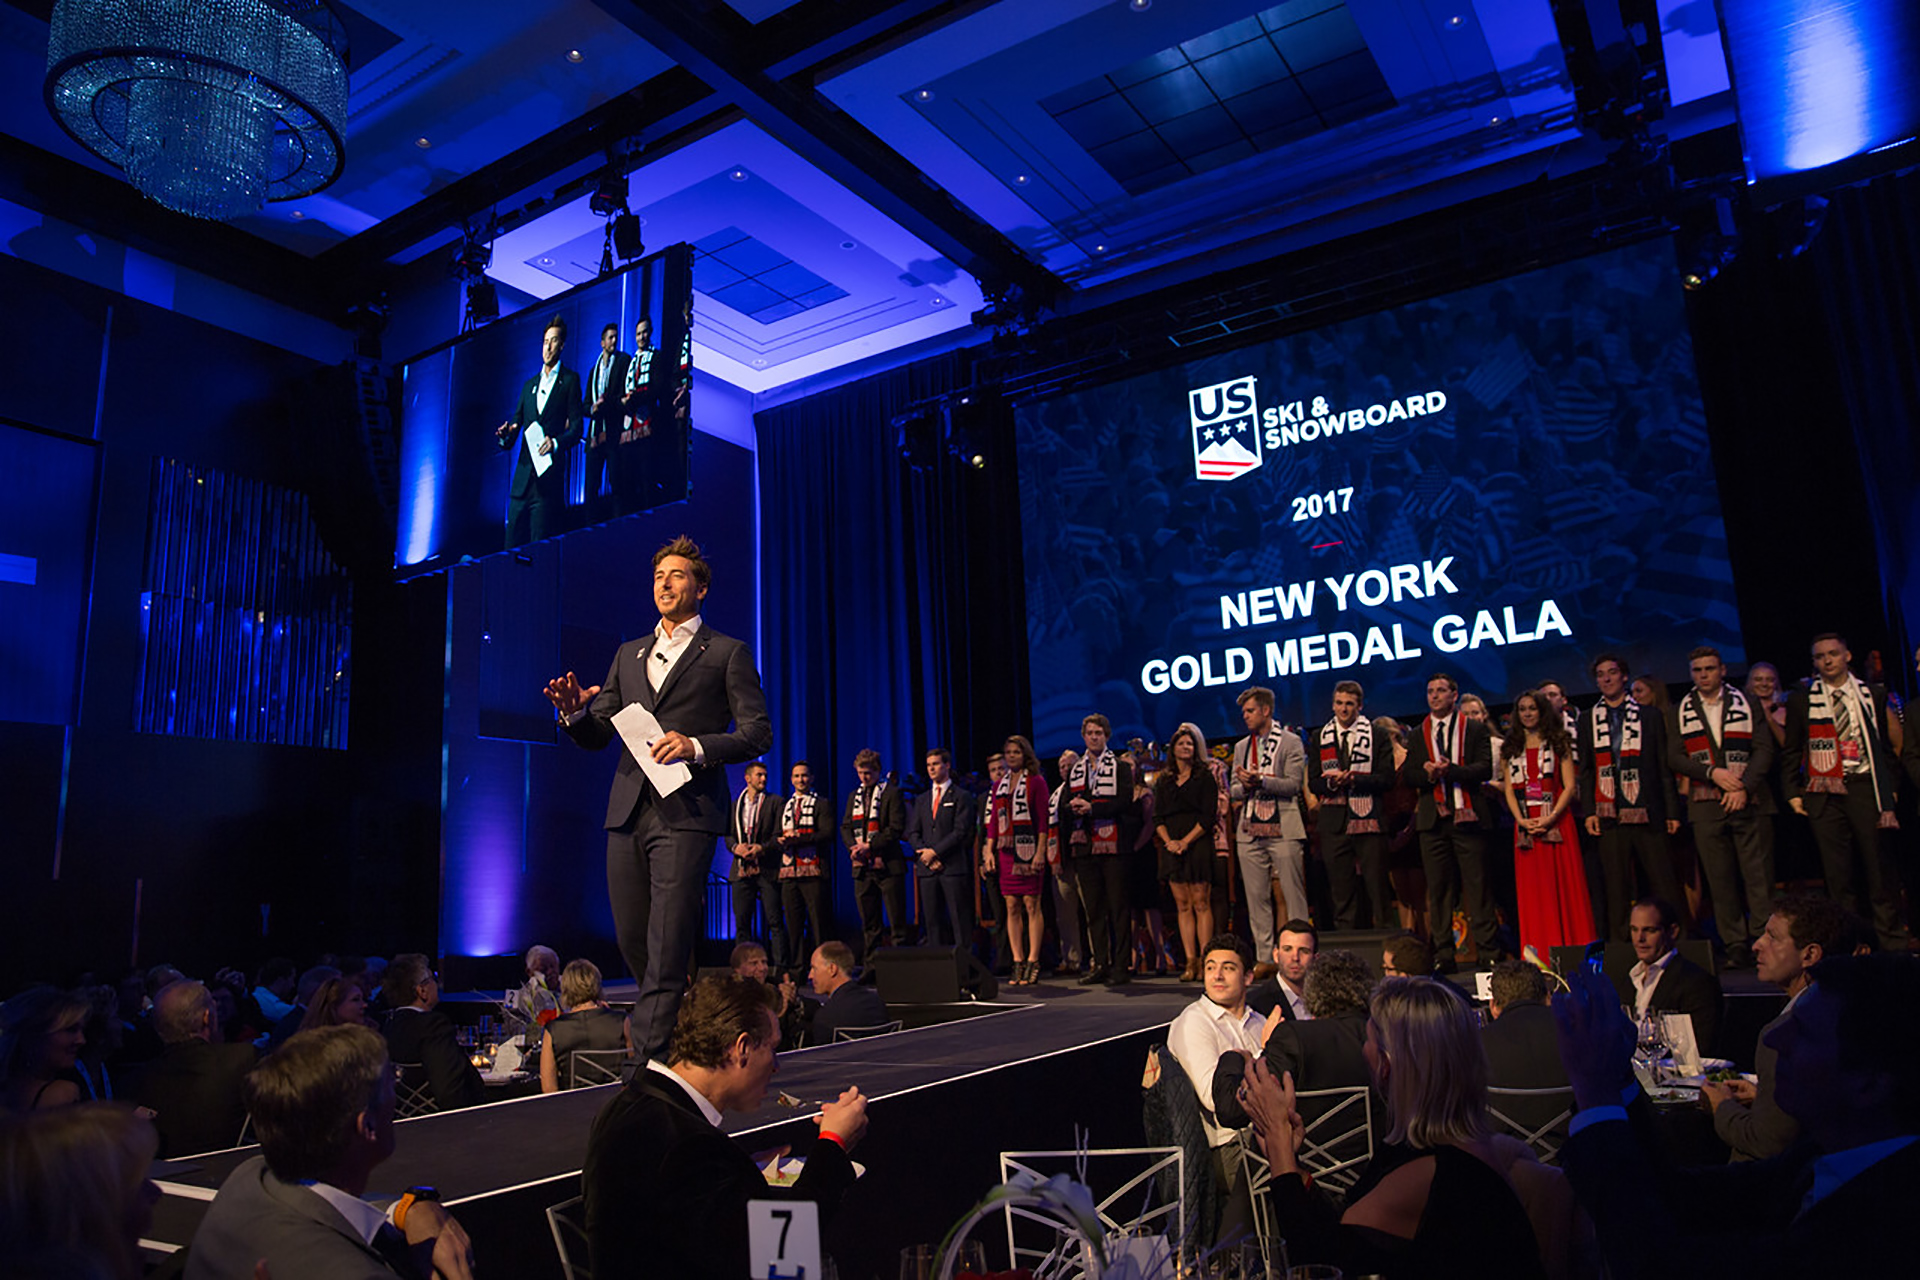 Jonny Moseley introduces athletes at last year's New York Gold Medal Gala.